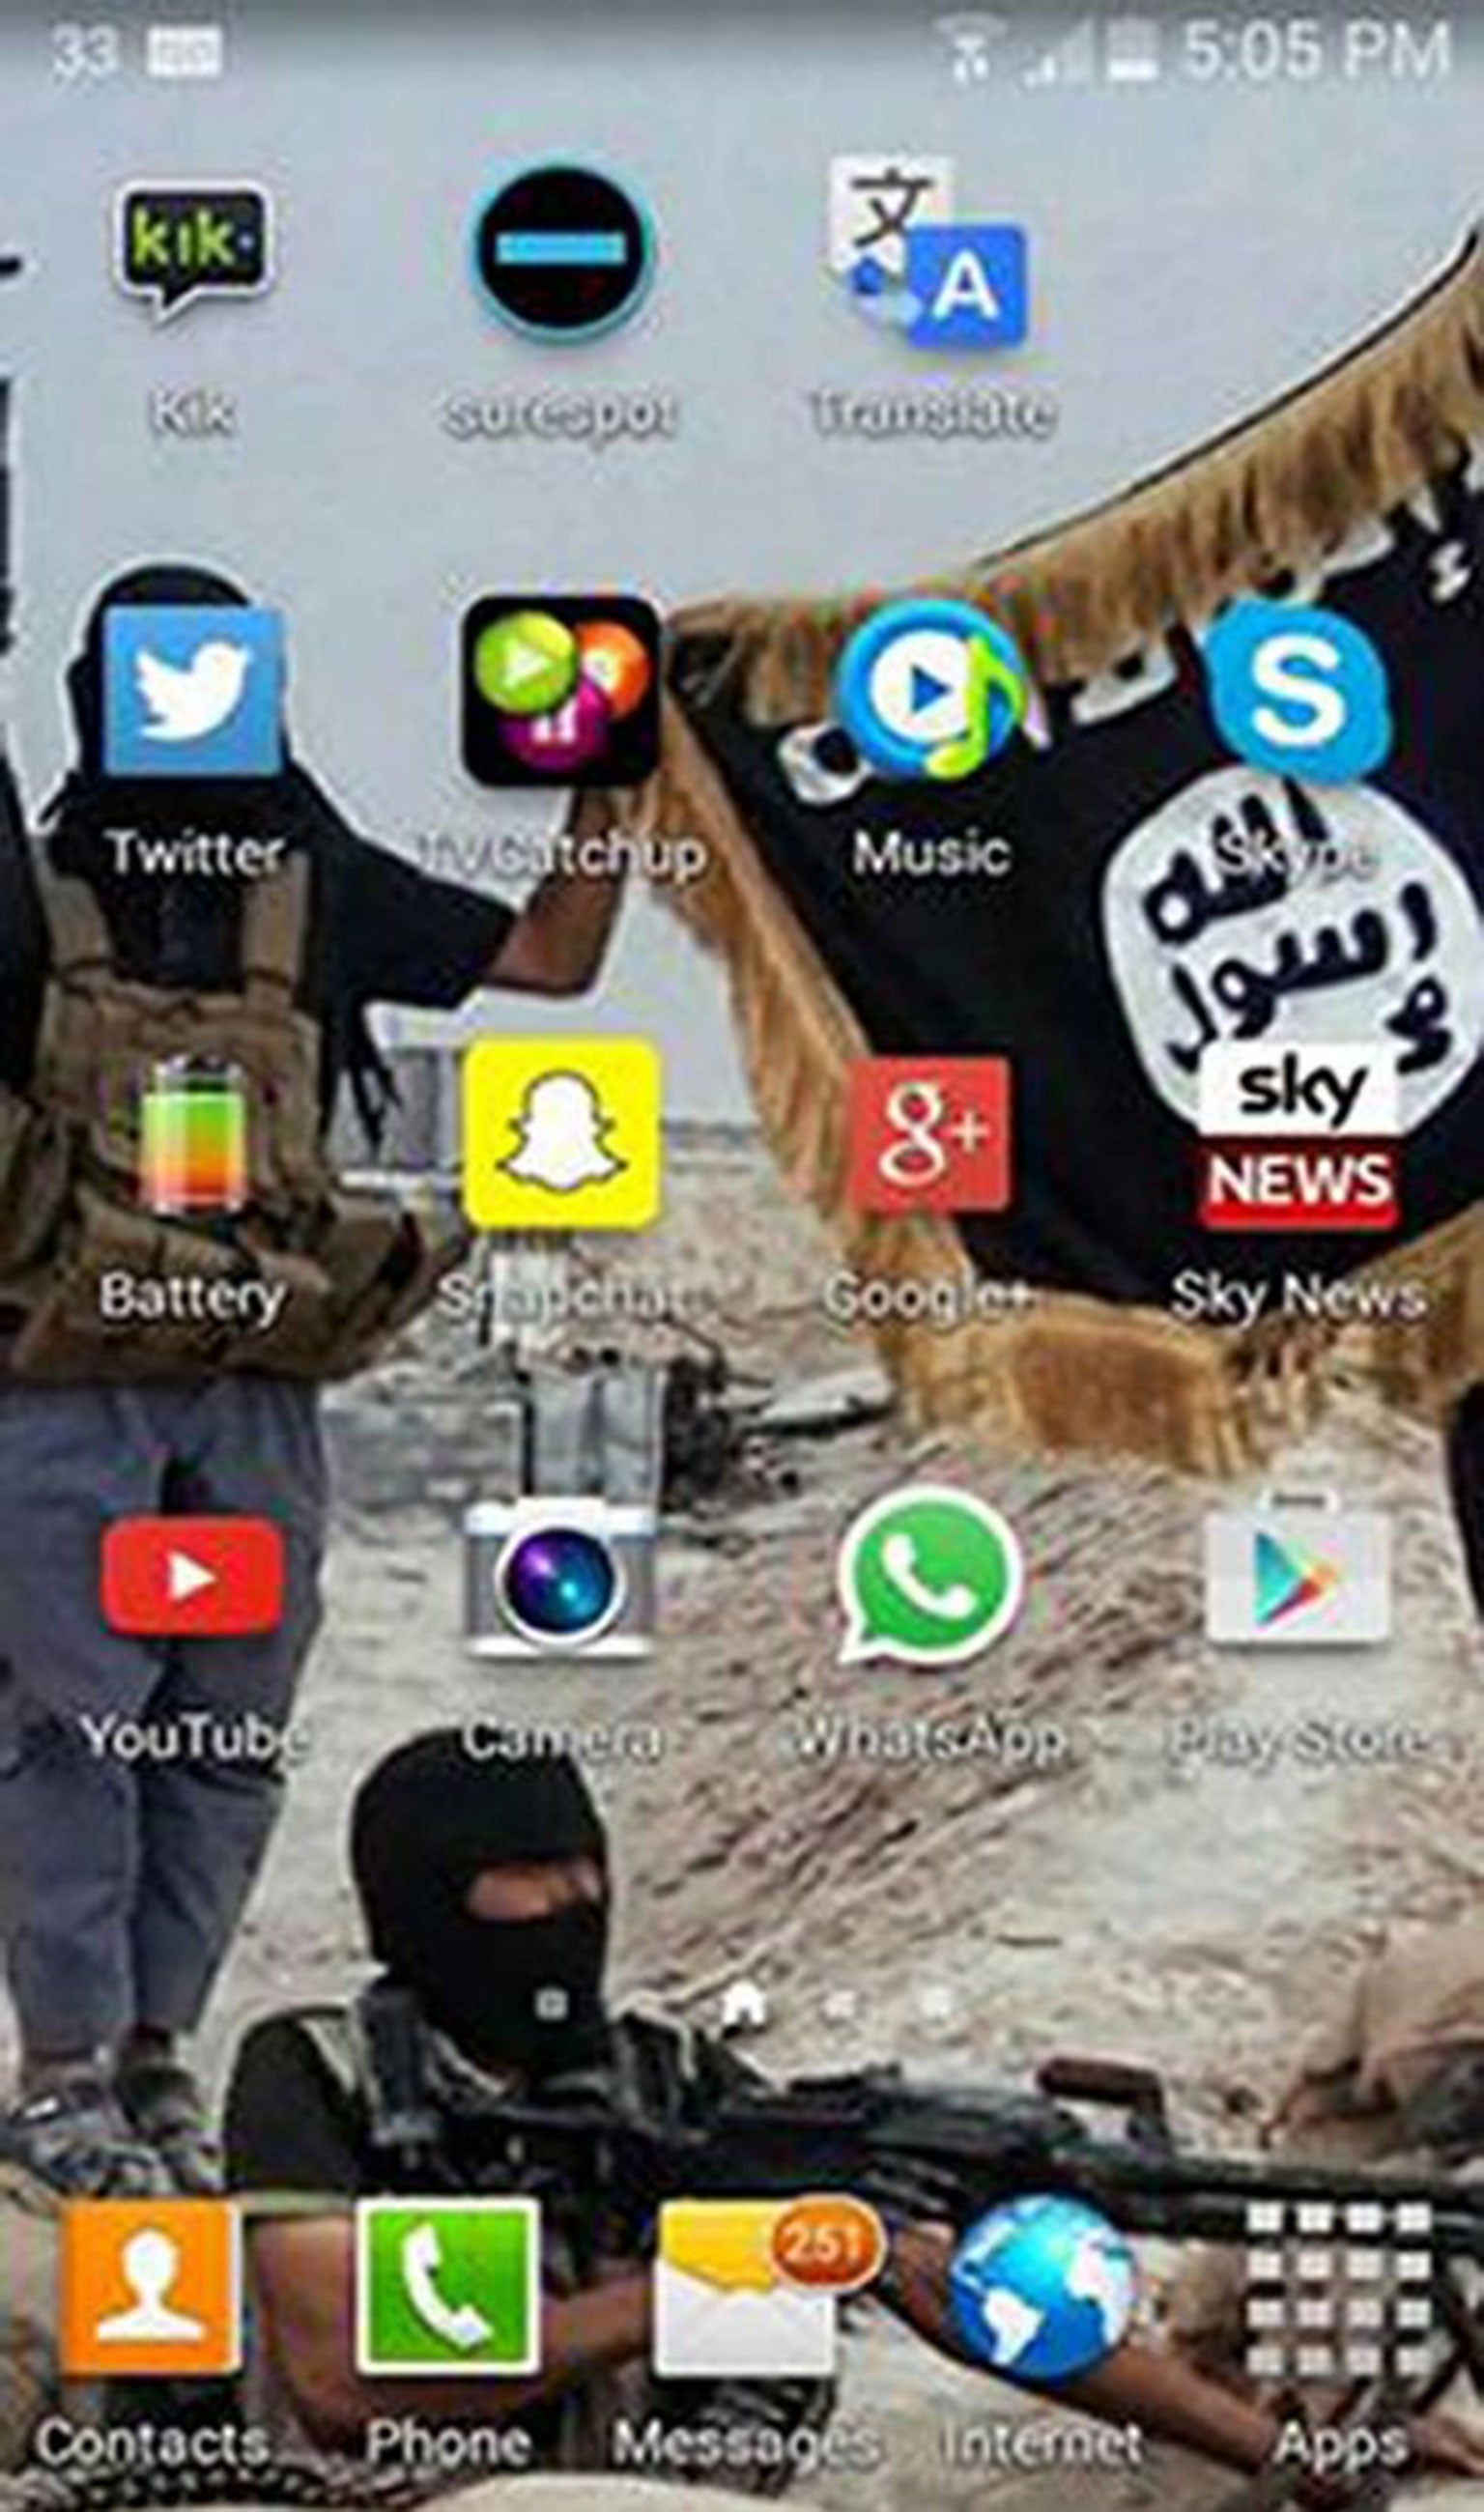 A wallpaper on the 15-year-old British boy's phone, discovered hidden under his mattress by police, showing Isis propaganda